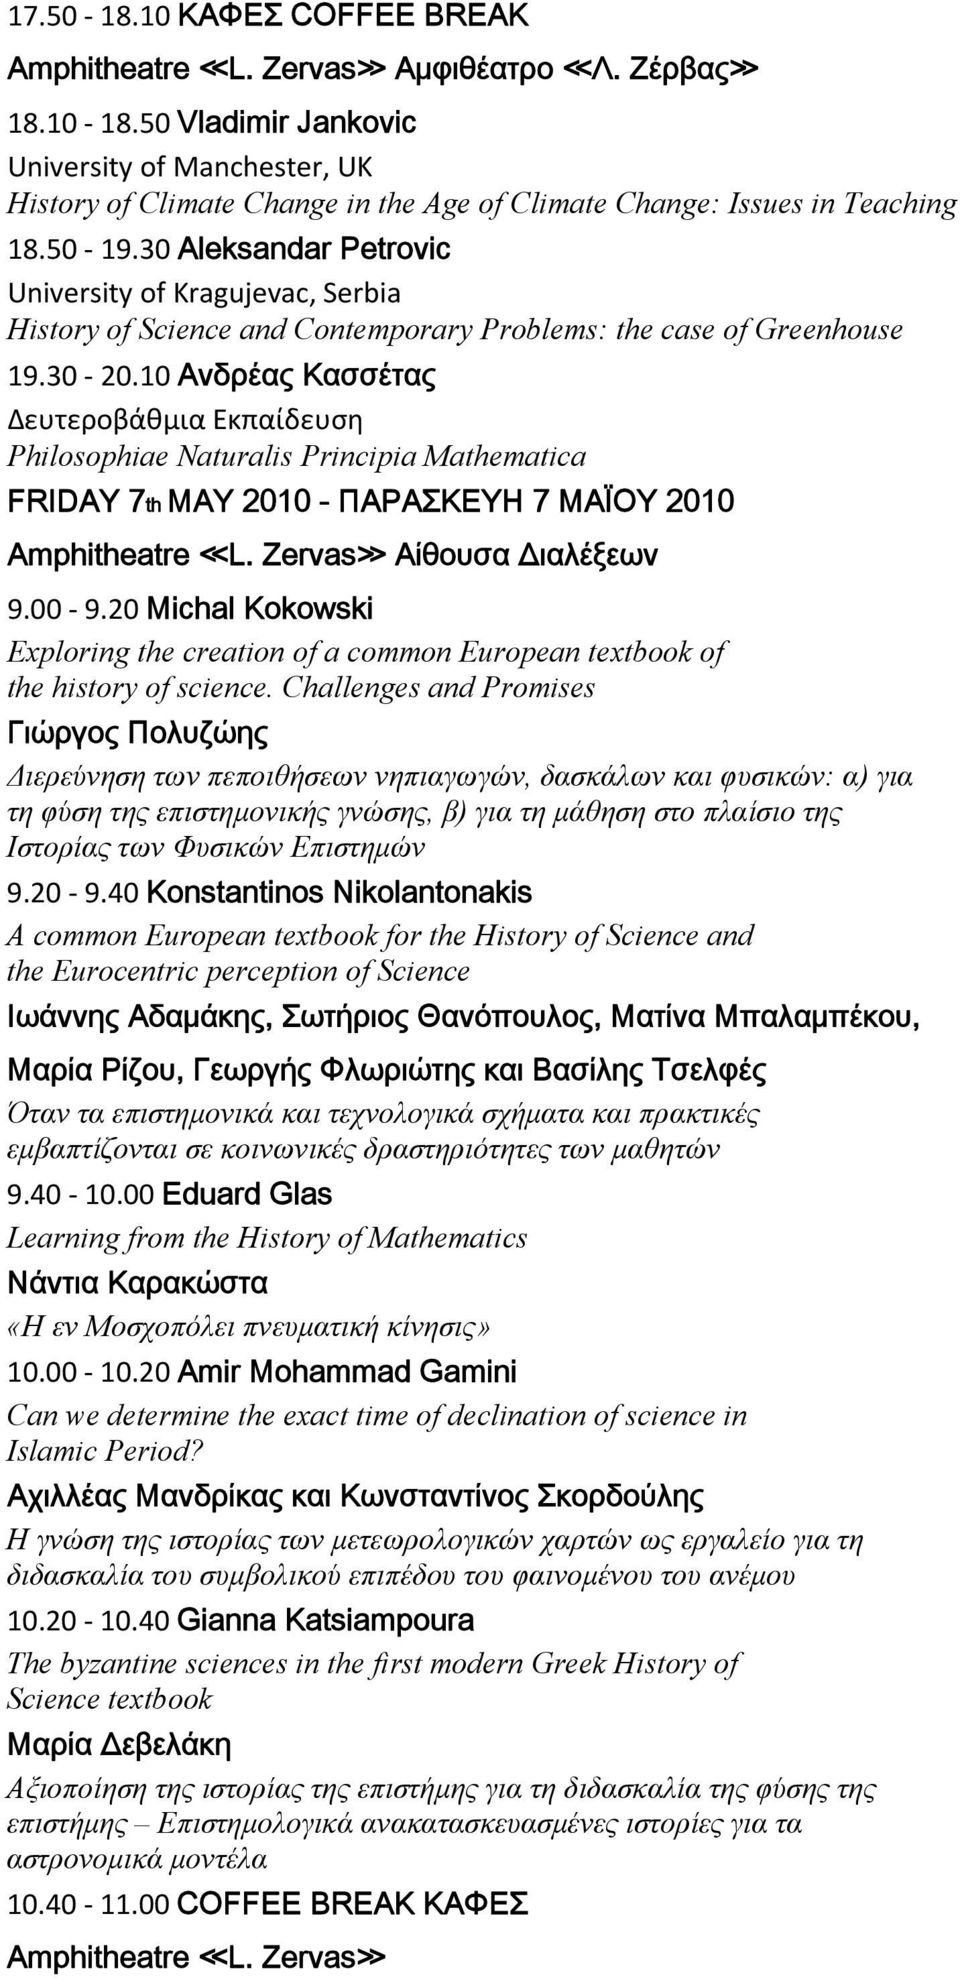 30 Aleksandar Petrovic University of Kragujevac, Serbia History of Science and Contemporary Problems: the case of Greenhouse 19.30 20.